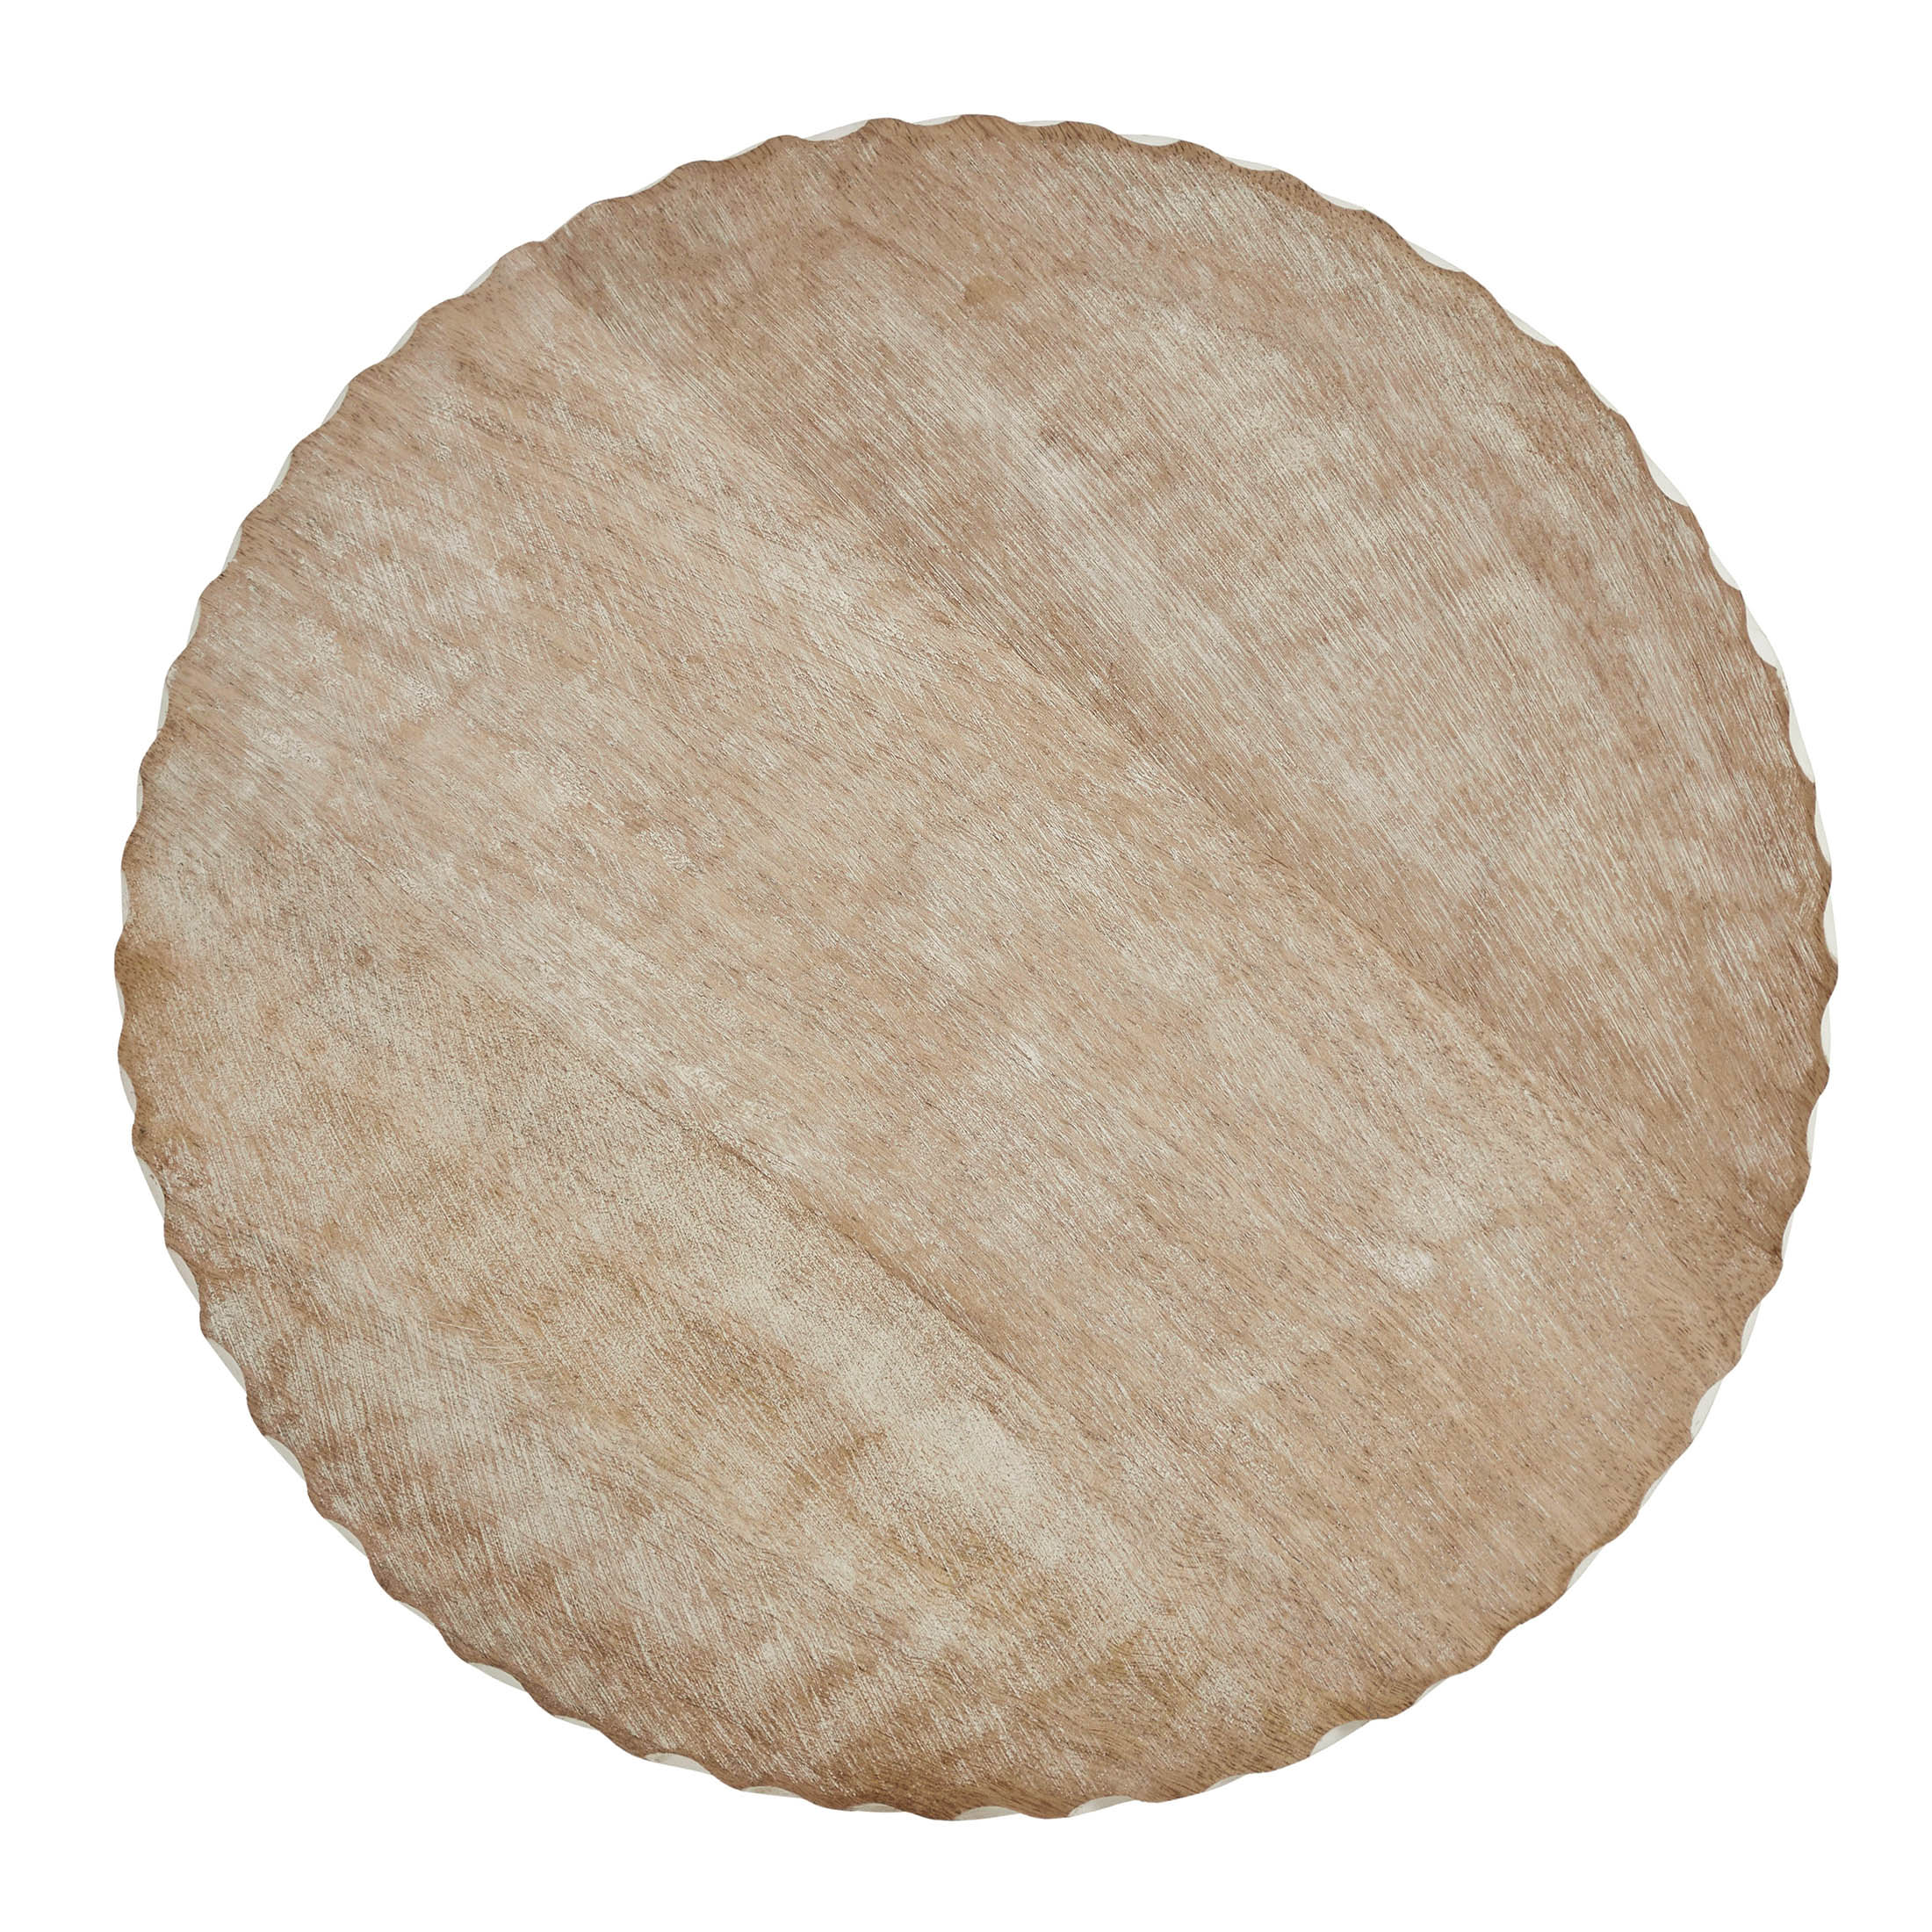 My Texas House 16" Natural White Diagonal Round Wood Decorative Tray - image 2 of 5